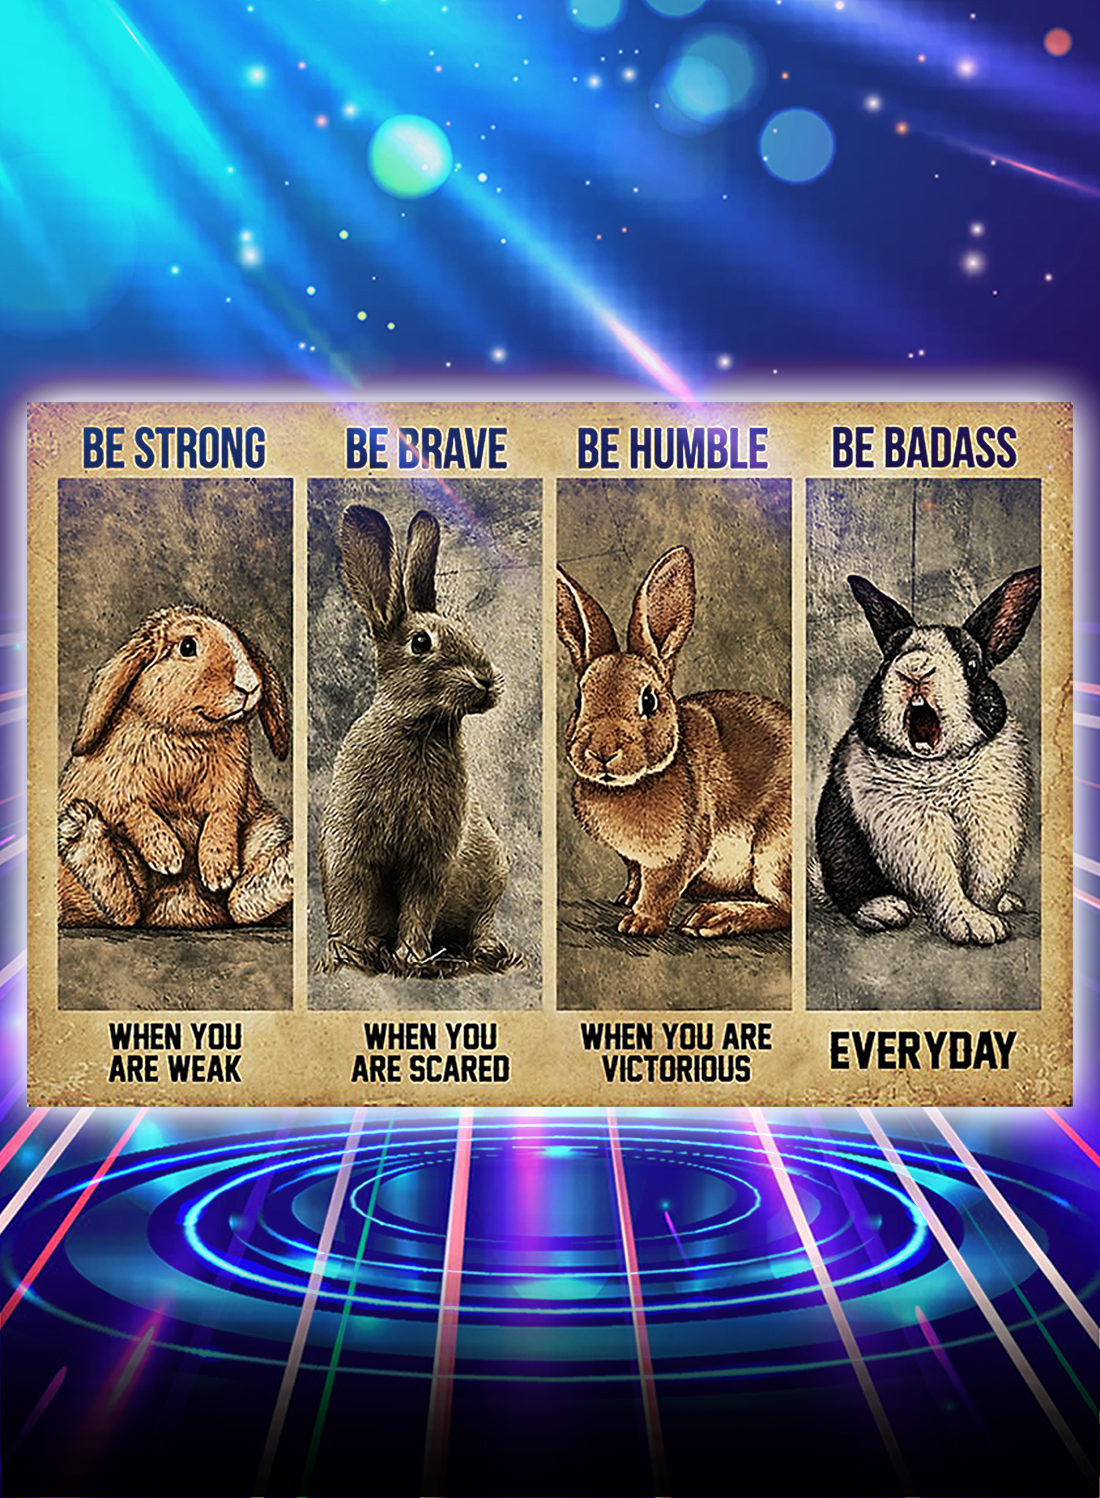 RABBIT BE STRONG BE BRAVE BE HUMBLE BE BADASS POSTER - A4